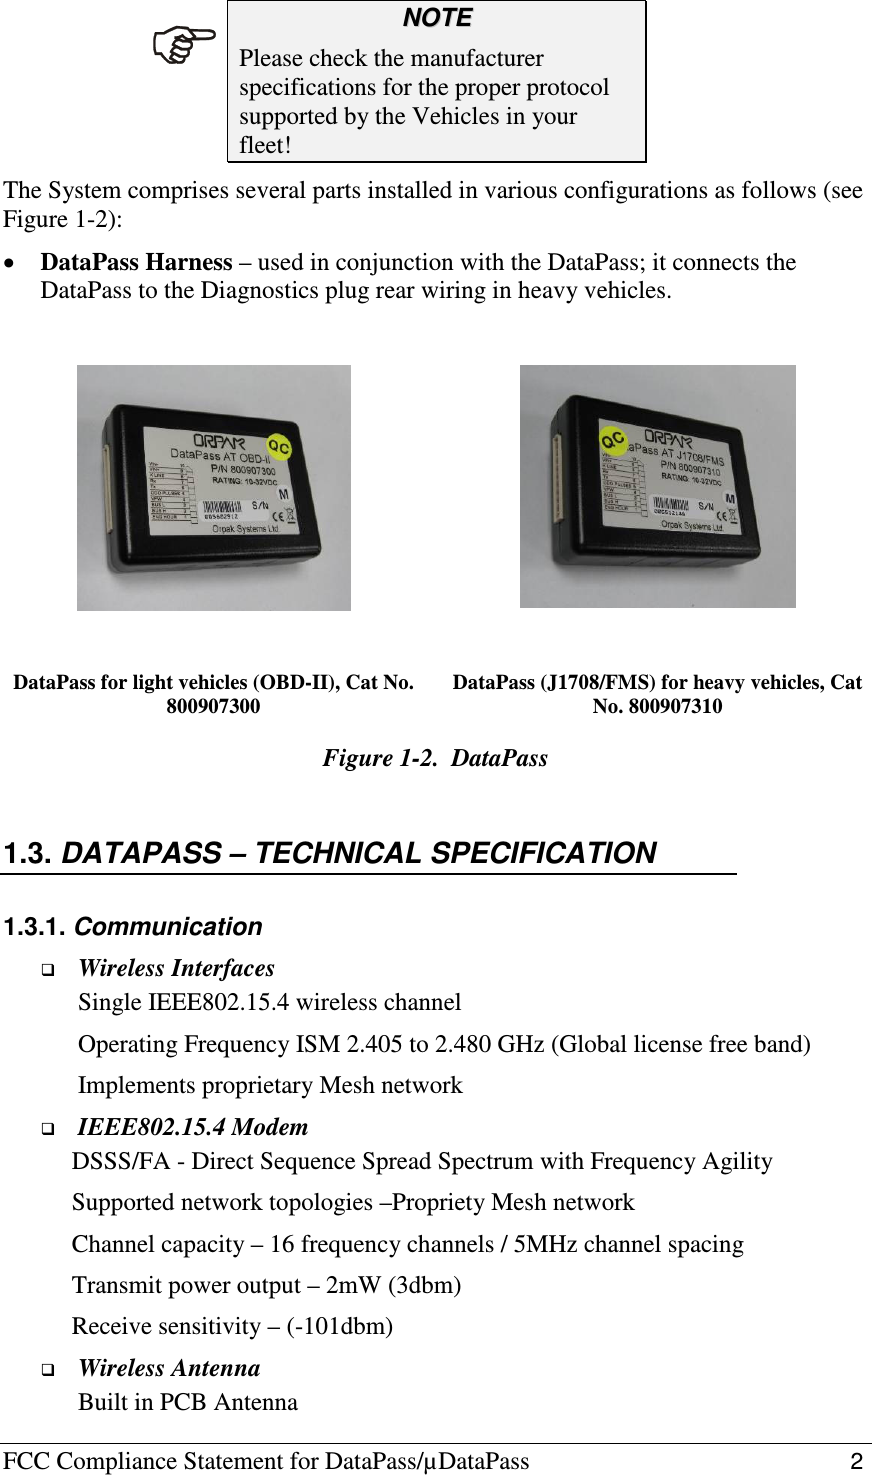 FCC Compliance Statement for DataPass/µDataPass                                                   2  NNOOTTEE  Please check the manufacturer specifications for the proper protocol supported by the Vehicles in your fleet! The System comprises several parts installed in various configurations as follows (see Figure  1-2): • DataPass Harness – used in conjunction with the DataPass; it connects the DataPass to the Diagnostics plug rear wiring in heavy vehicles.      DataPass for light vehicles (OBD-II), Cat No. 800907300 DataPass (J1708/FMS) for heavy vehicles, Cat No. 800907310 Figure  1-2.  DataPass  1.3. DATAPASS – TECHNICAL SPECIFICATION 1.3.1. Communication  Wireless Interfaces Single IEEE802.15.4 wireless channel Operating Frequency ISM 2.405 to 2.480 GHz (Global license free band) Implements proprietary Mesh network  IEEE802.15.4 Modem      DSSS/FA - Direct Sequence Spread Spectrum with Frequency Agility      Supported network topologies –Propriety Mesh network      Channel capacity – 16 frequency channels / 5MHz channel spacing       Transmit power output – 2mW (3dbm)      Receive sensitivity – (-101dbm)  Wireless Antenna Built in PCB Antenna  